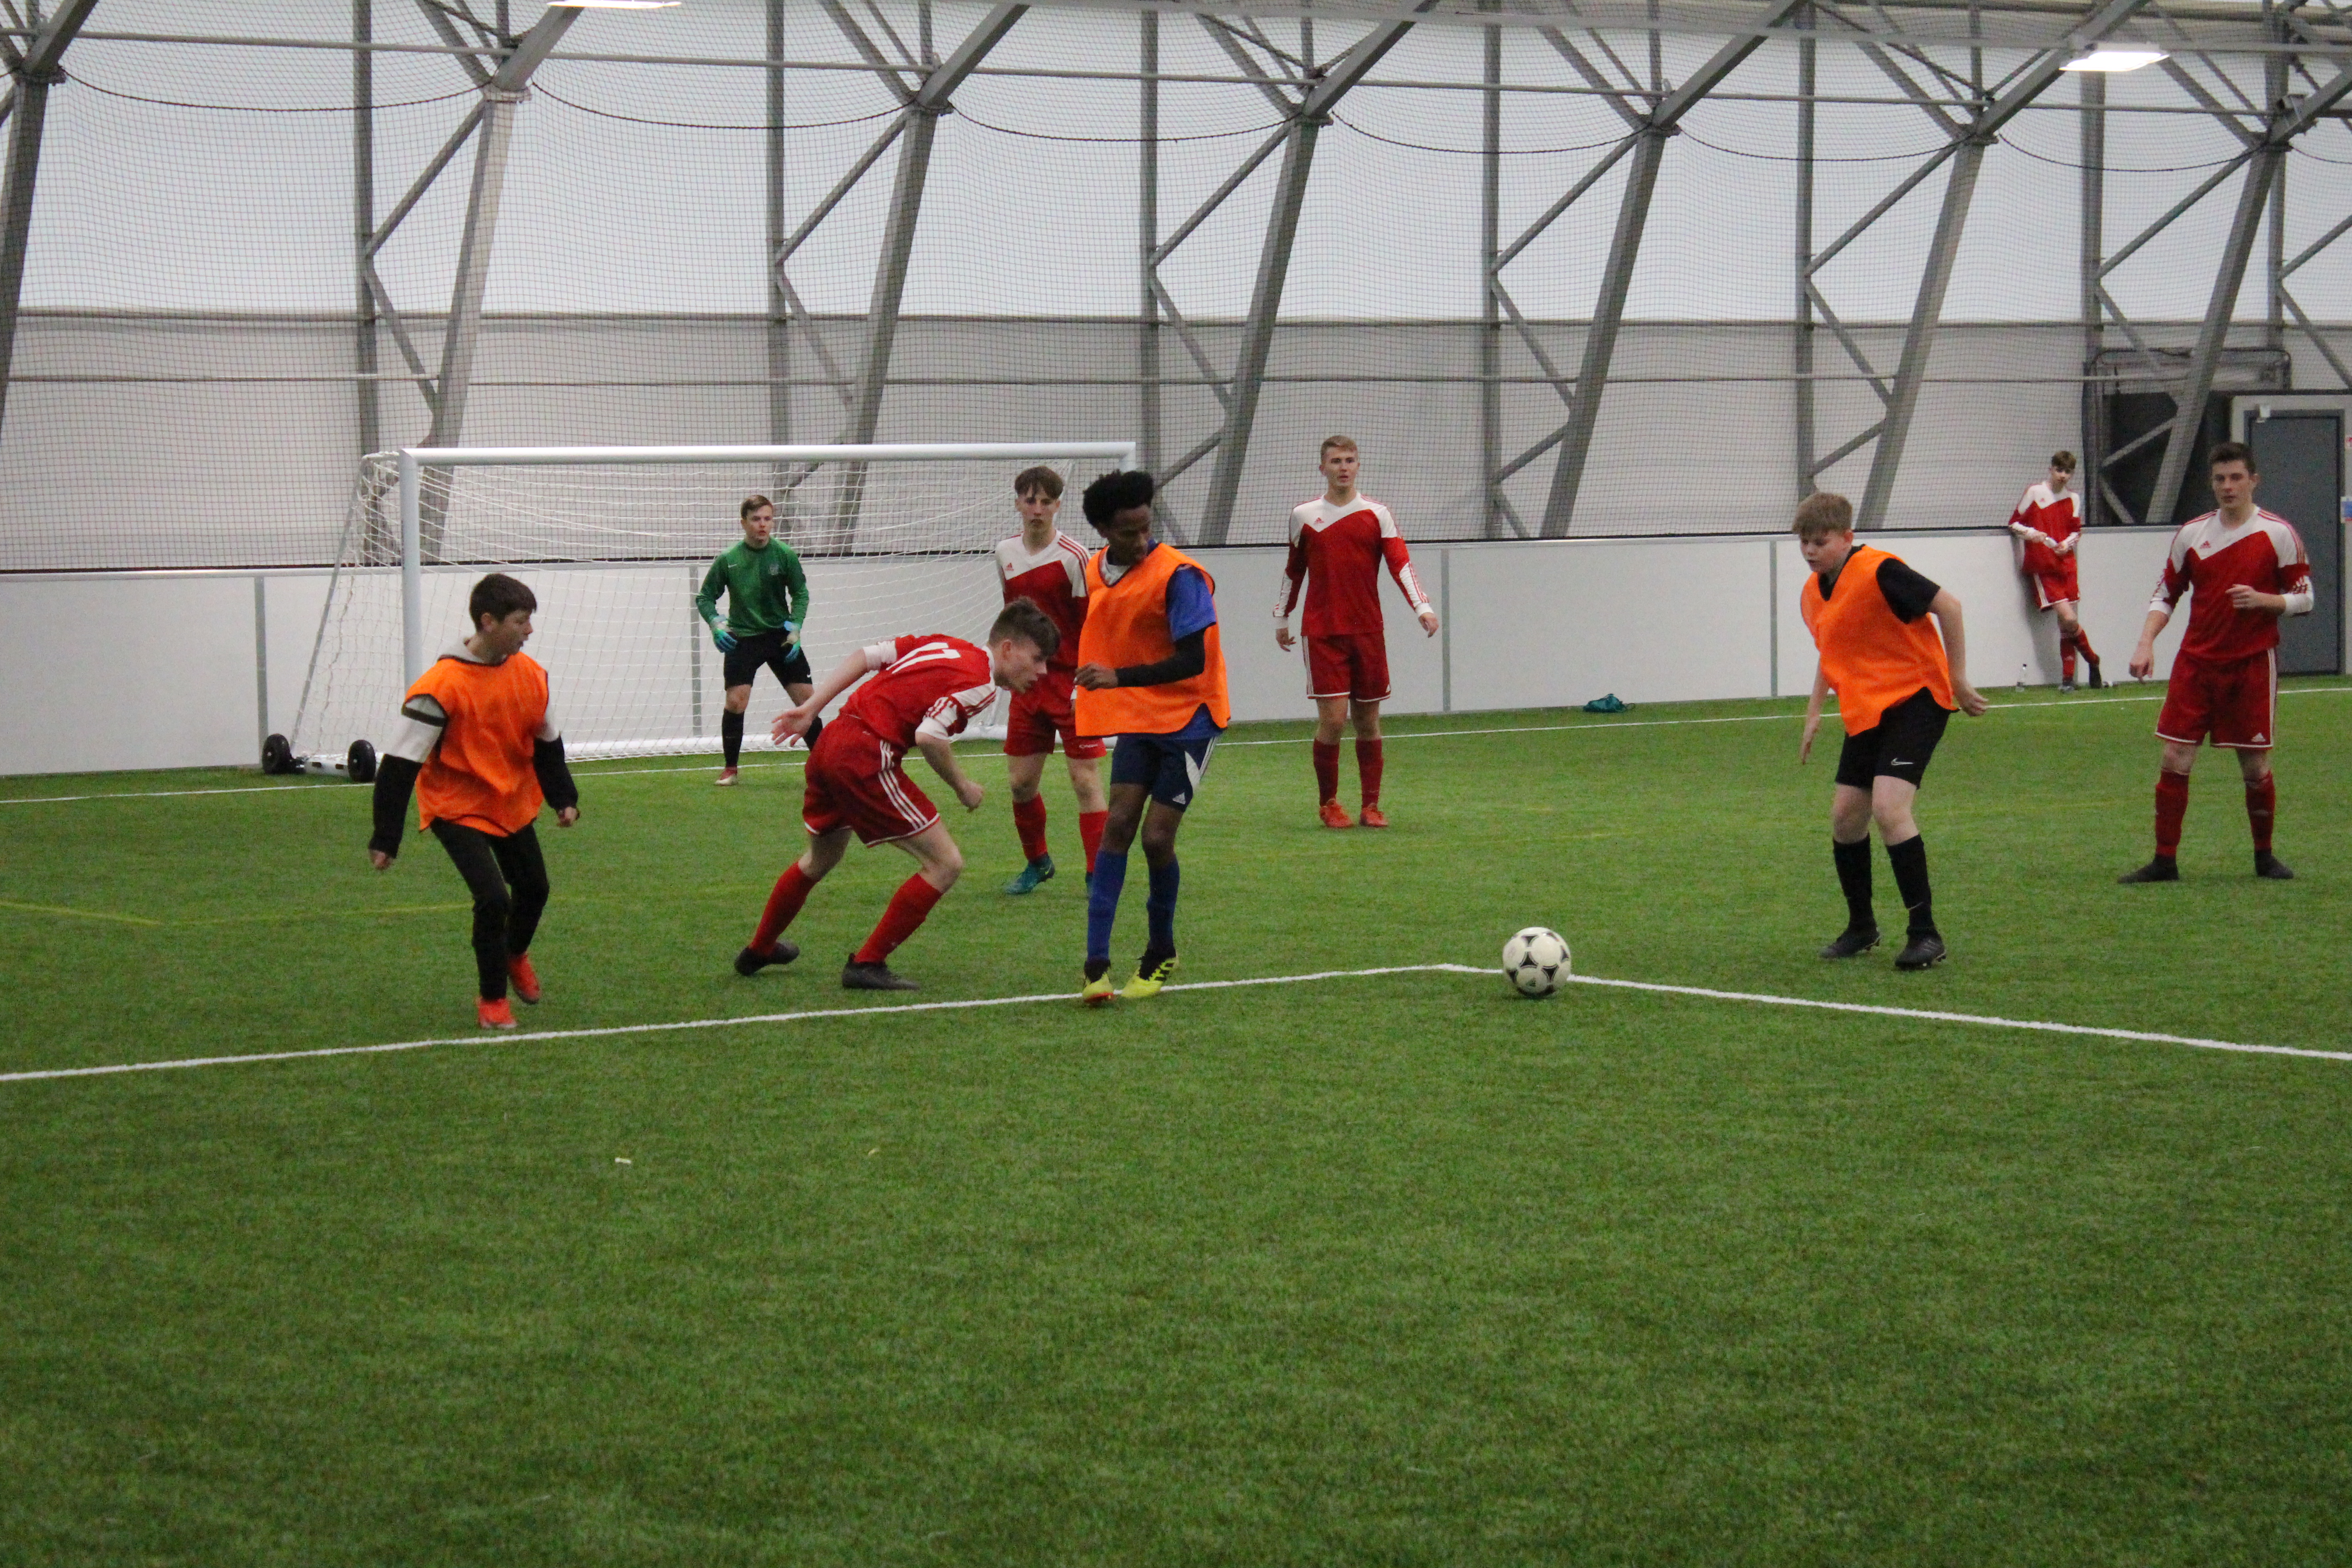 Ayrshire College backs Drop Everything and Move Week with football tournament